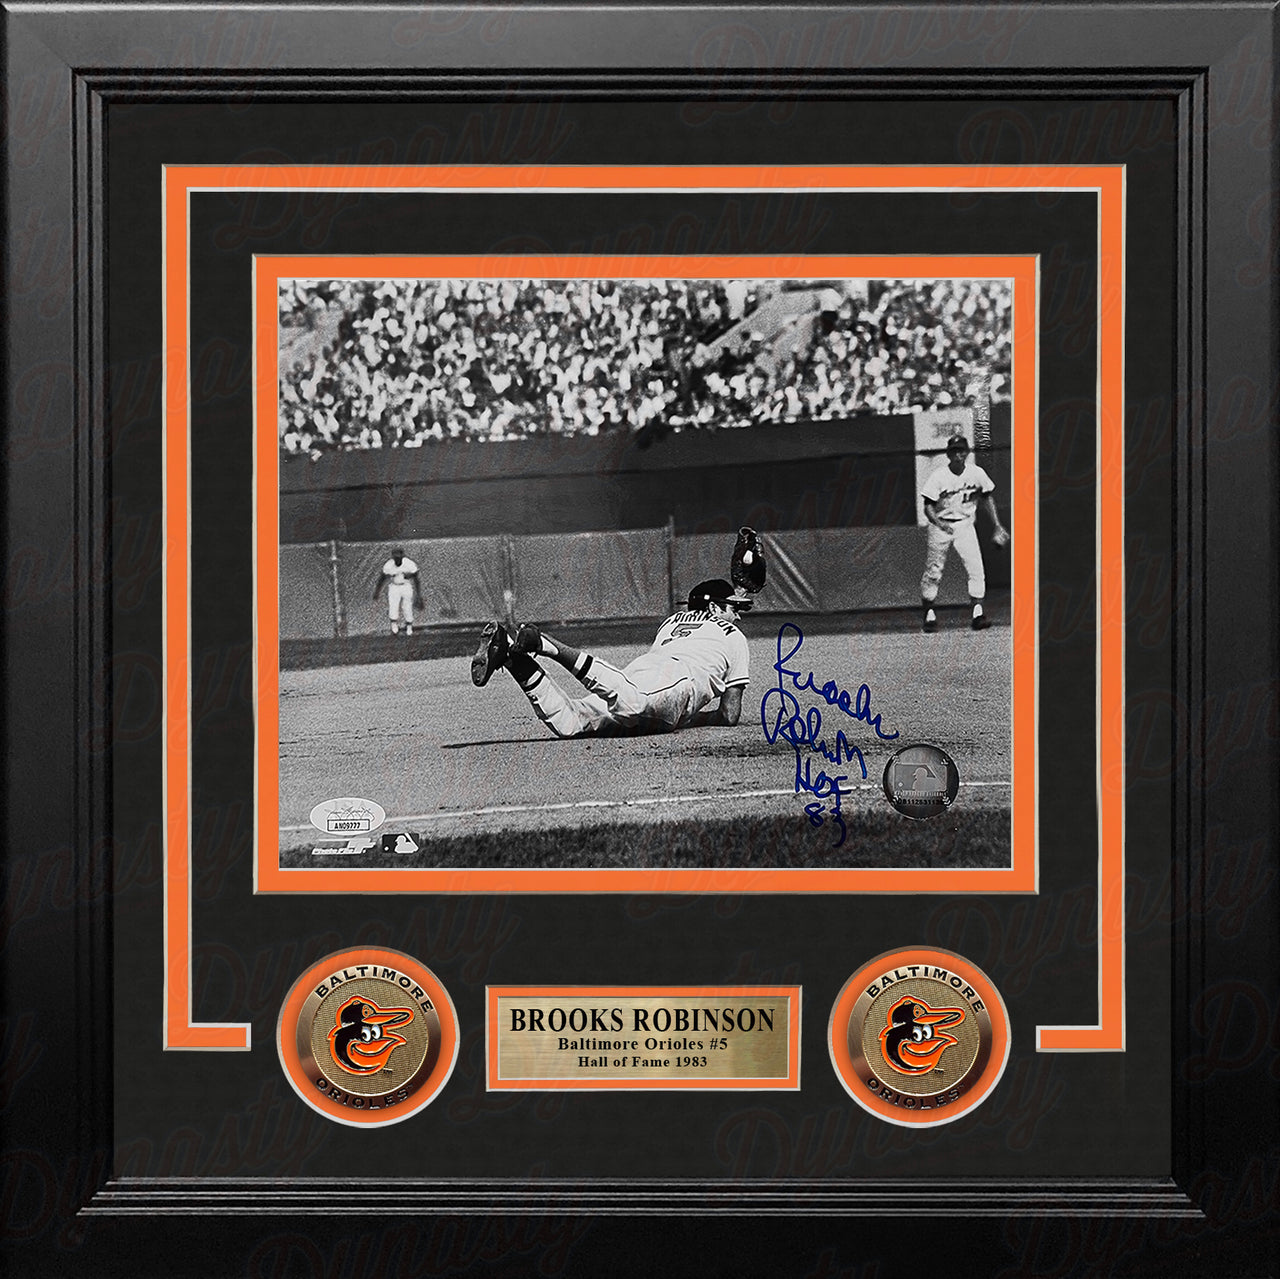 Brooks Robinson Diving Catch Baltimore Orioles Autographed 8" x 10" Framed Baseball Photo